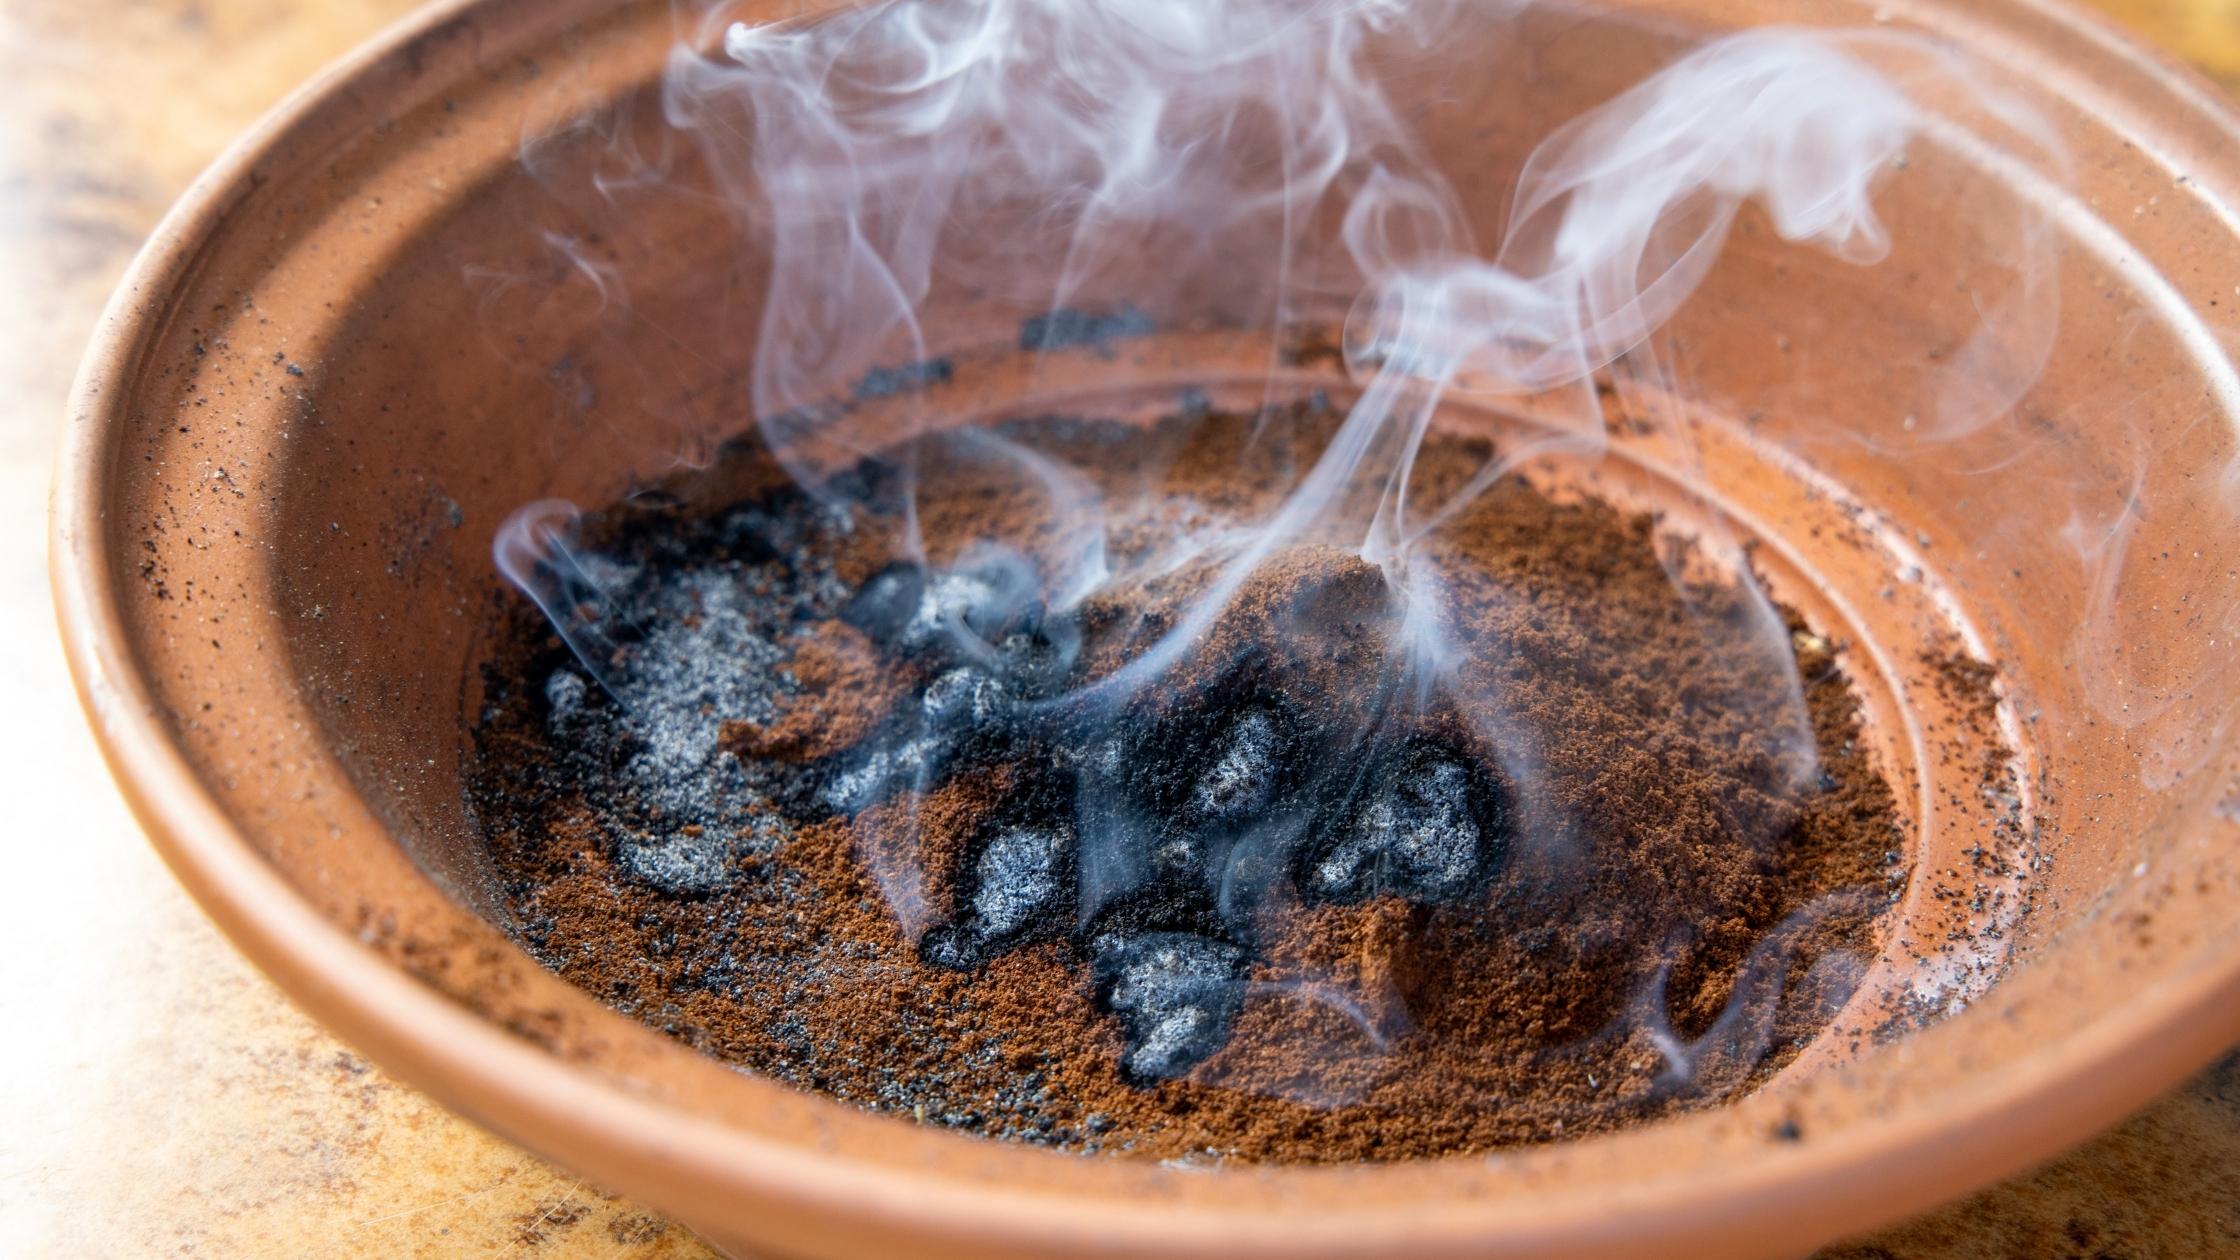 Burning coffee grounds for insect repellent